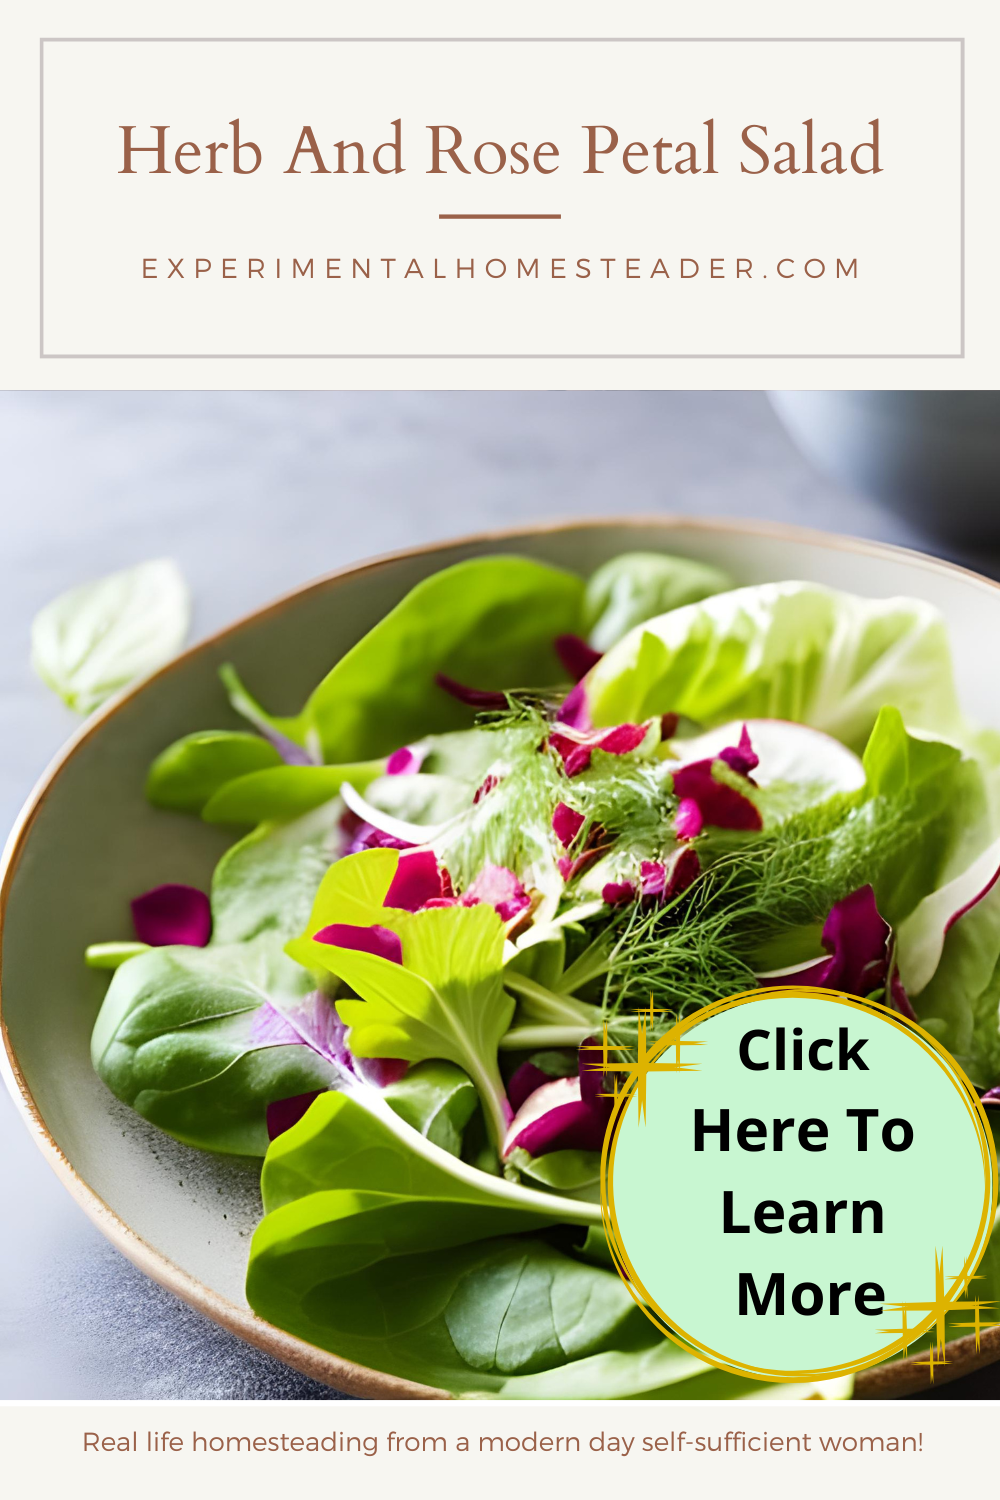 A lettuce salad with rose petals, dill week, and other herbs.